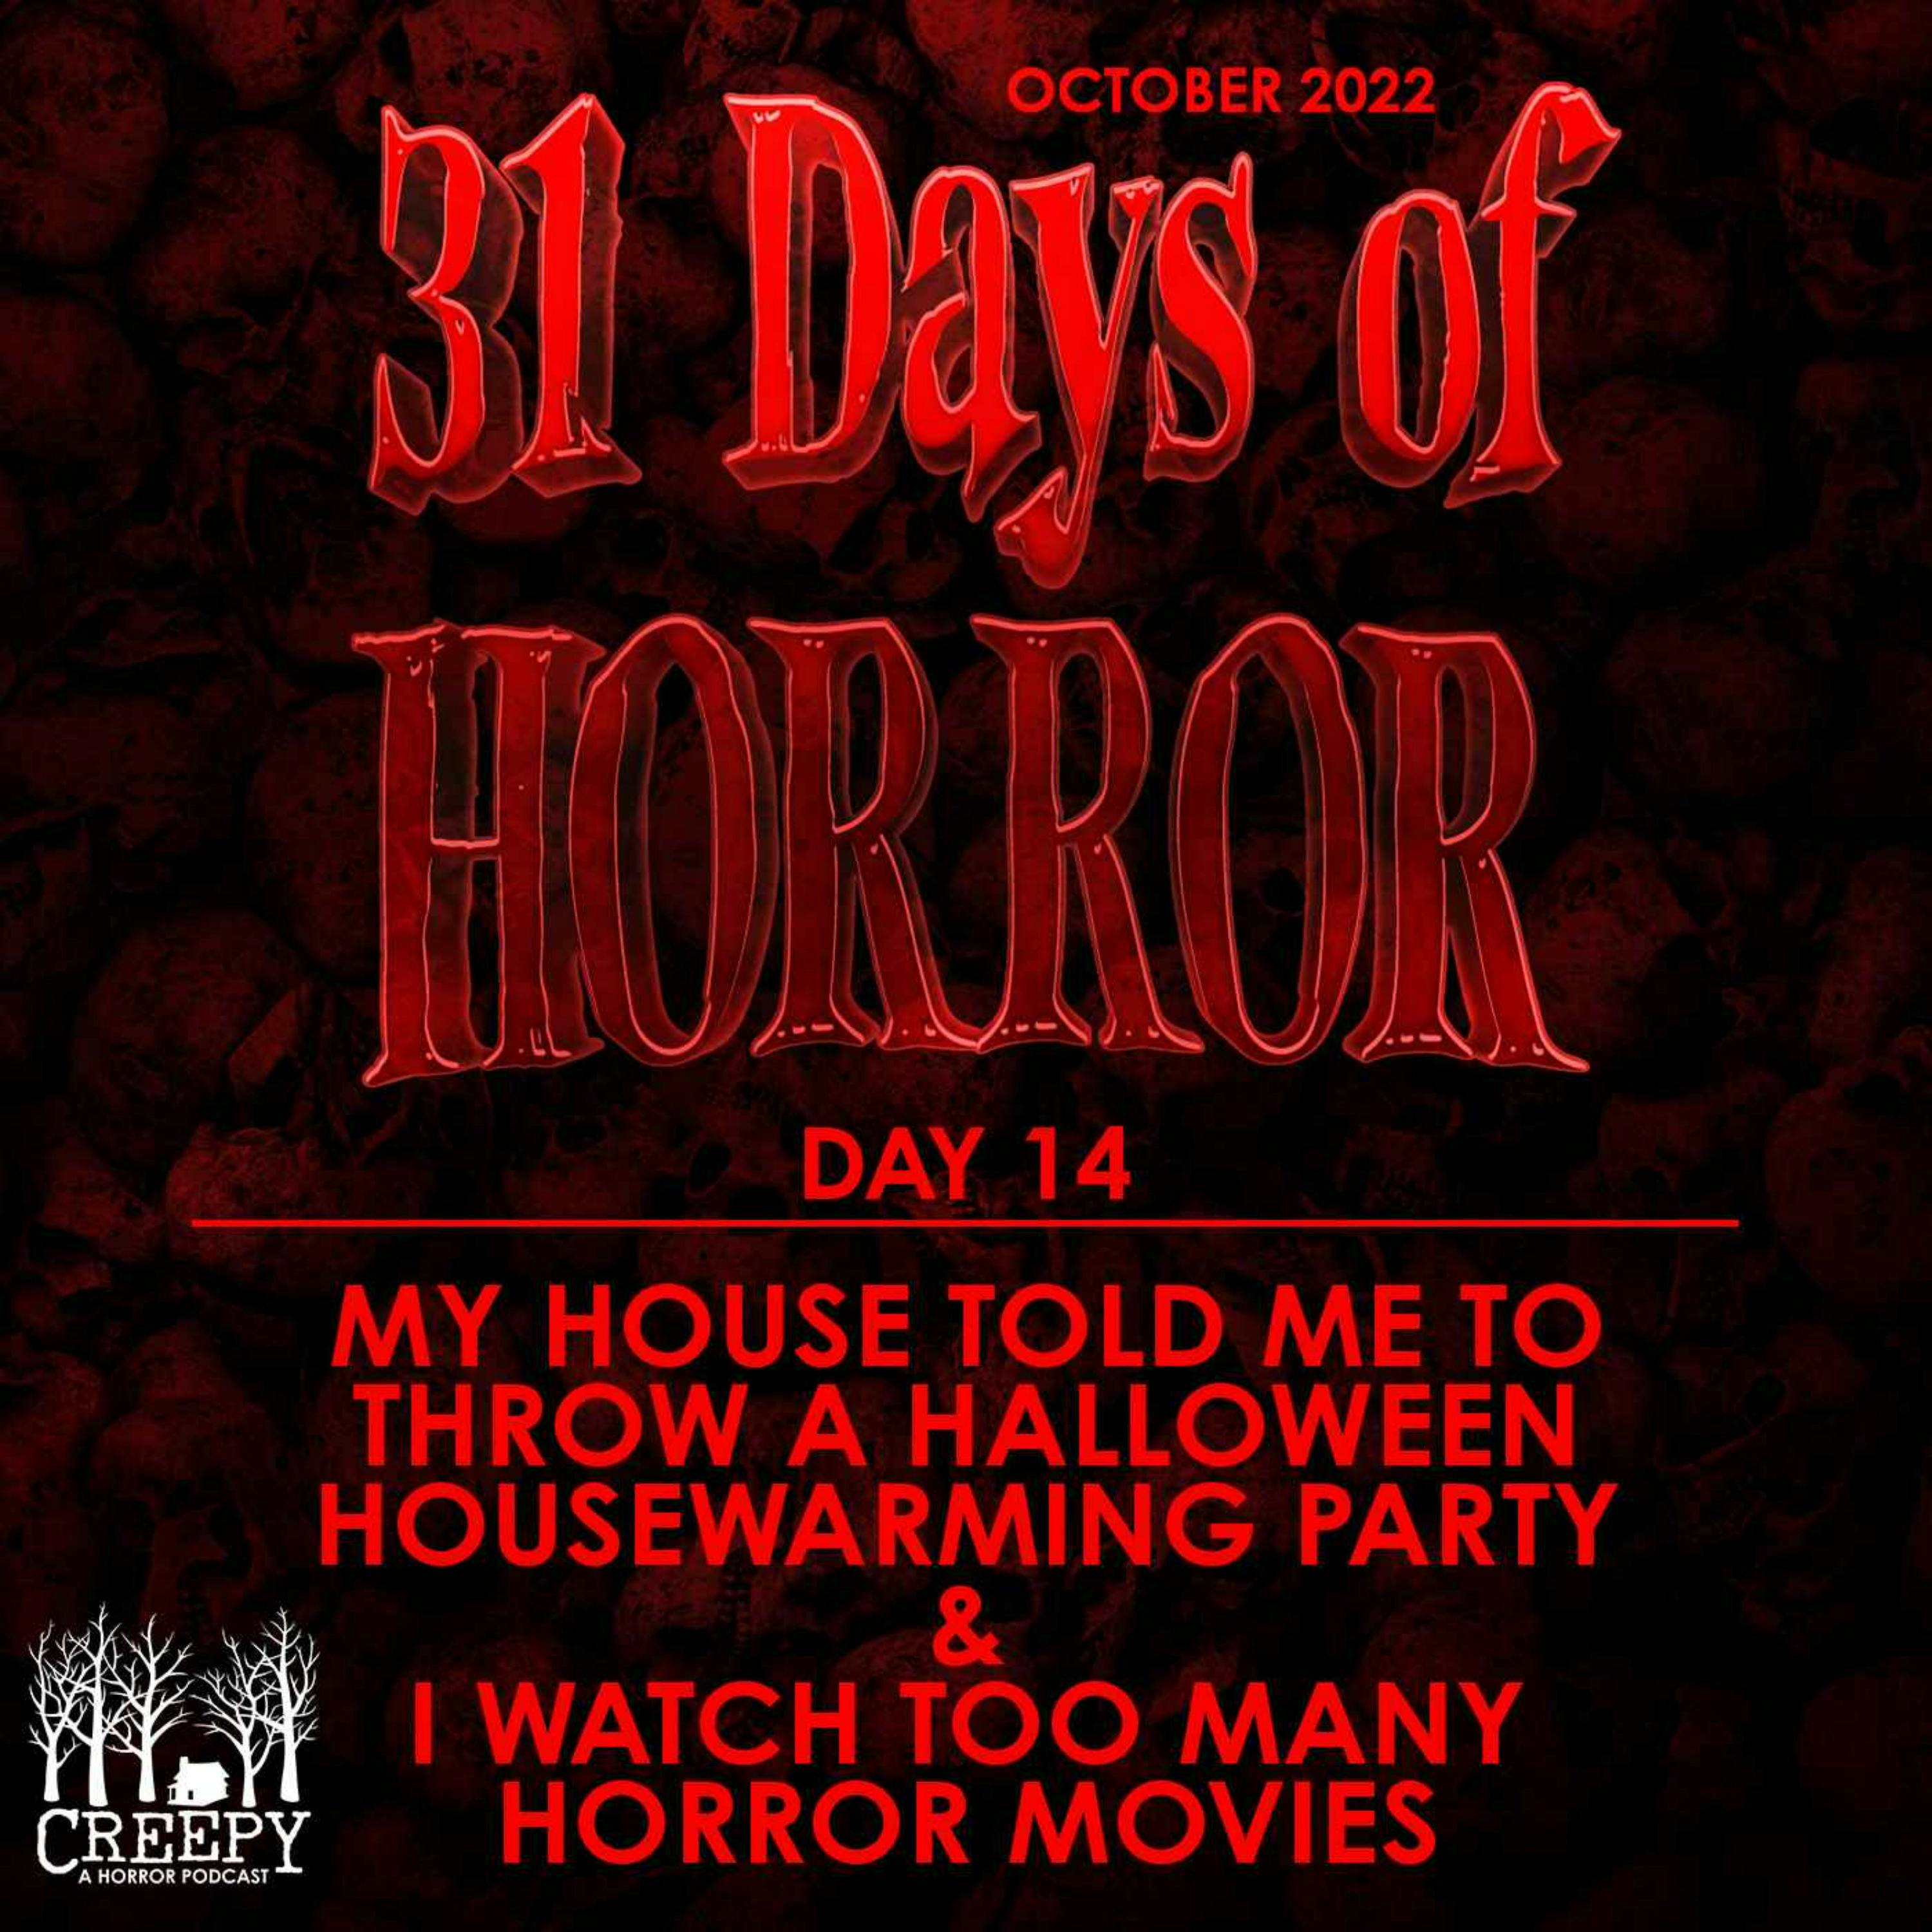 Day 14 - My House told me to throw a Halloween Housewarming Party & I Watch Too Many Horror Movies